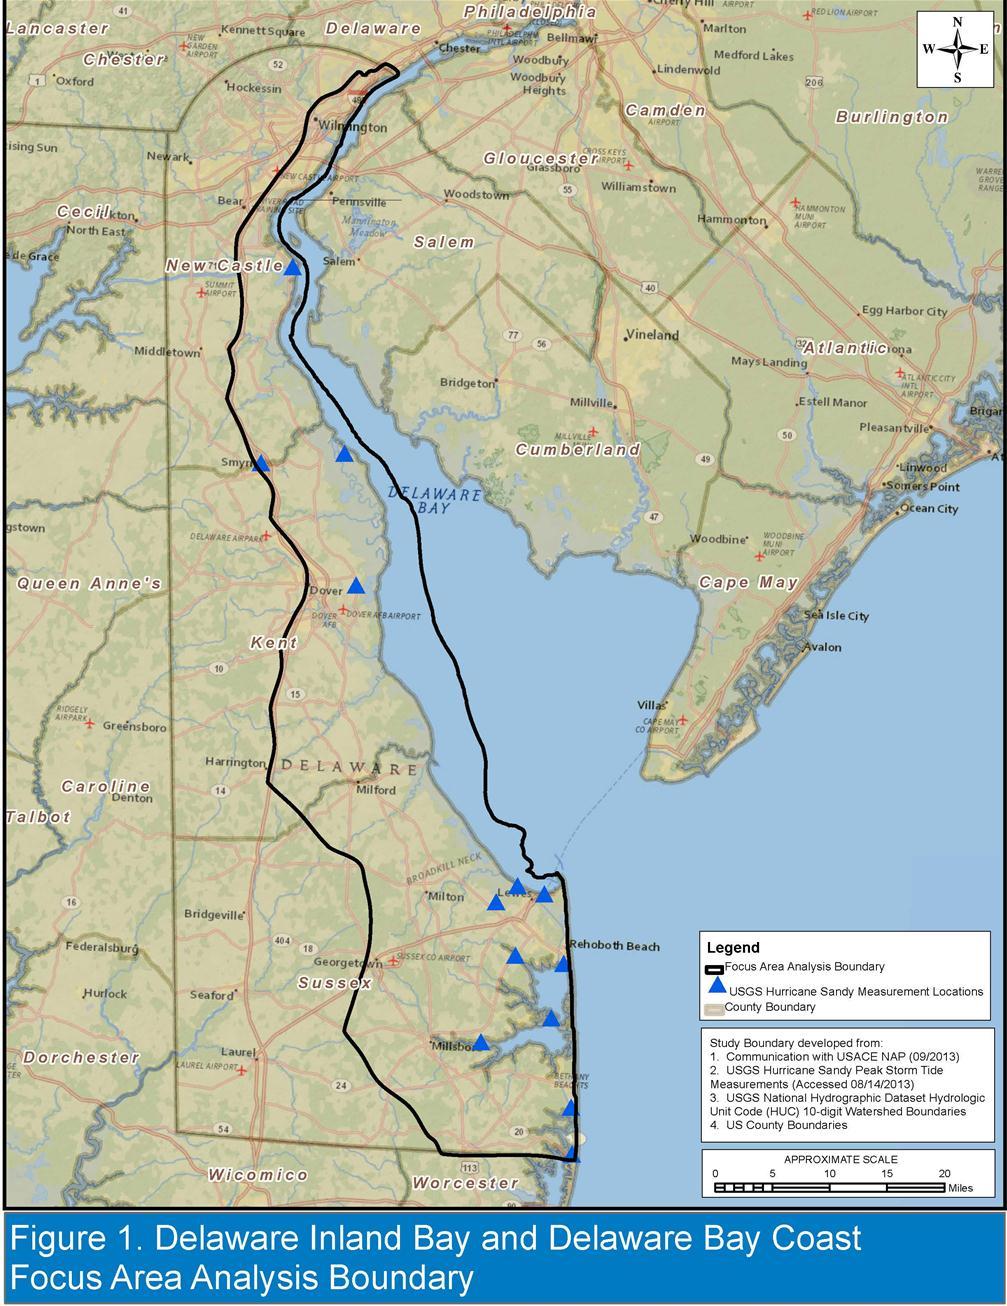 Delaware Inland Bays and Delaware Bay Reconnaissance Study 100% Federally Funded (Delaware) Focus Area of NACCS Visioning Sessions with Coastal